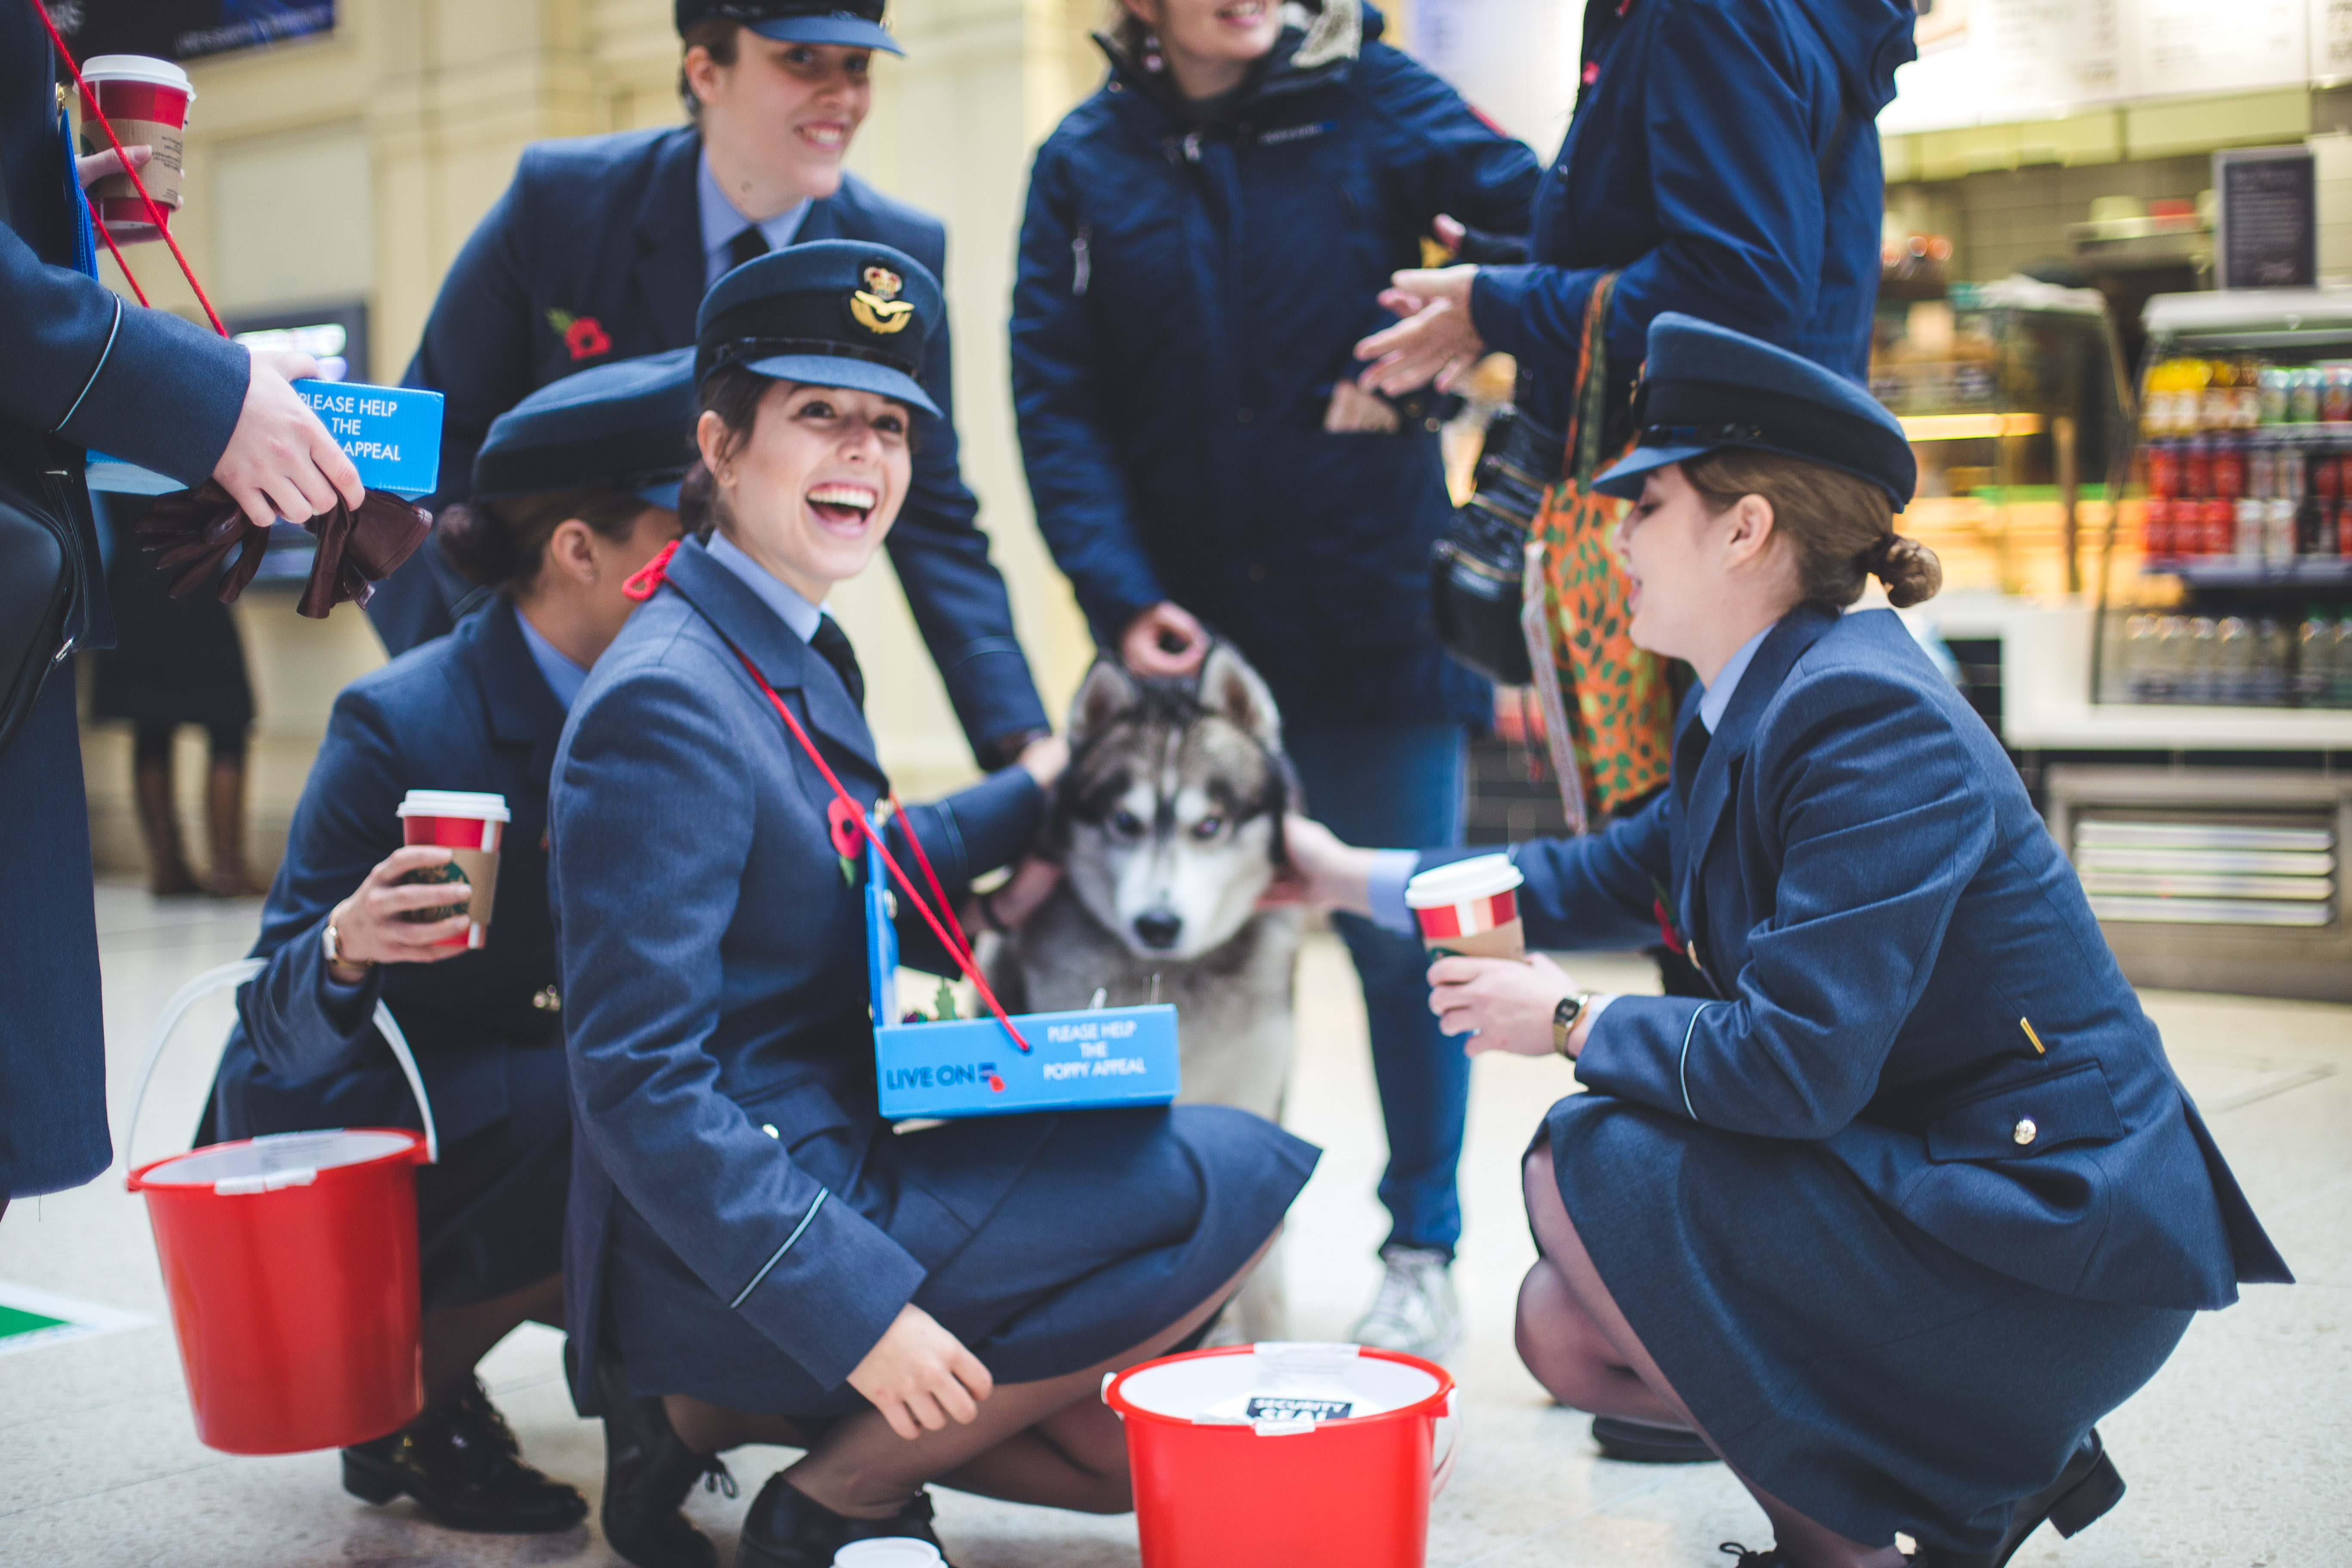 Personnel great public and dog with bucket collection in shopping centre.